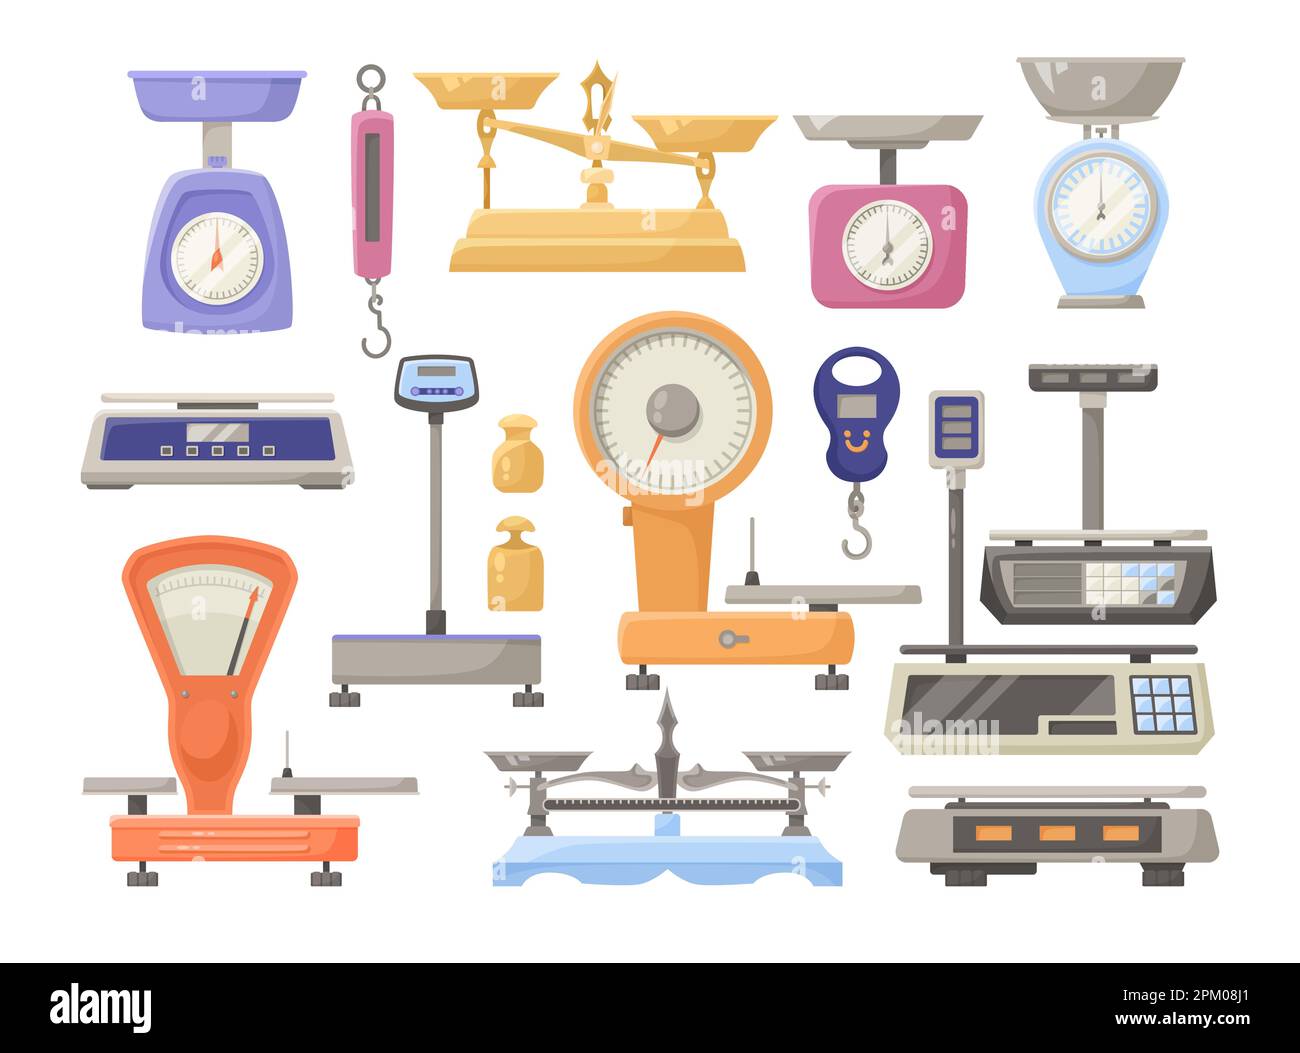 Types of Weighing Scales Used in the Kitchen